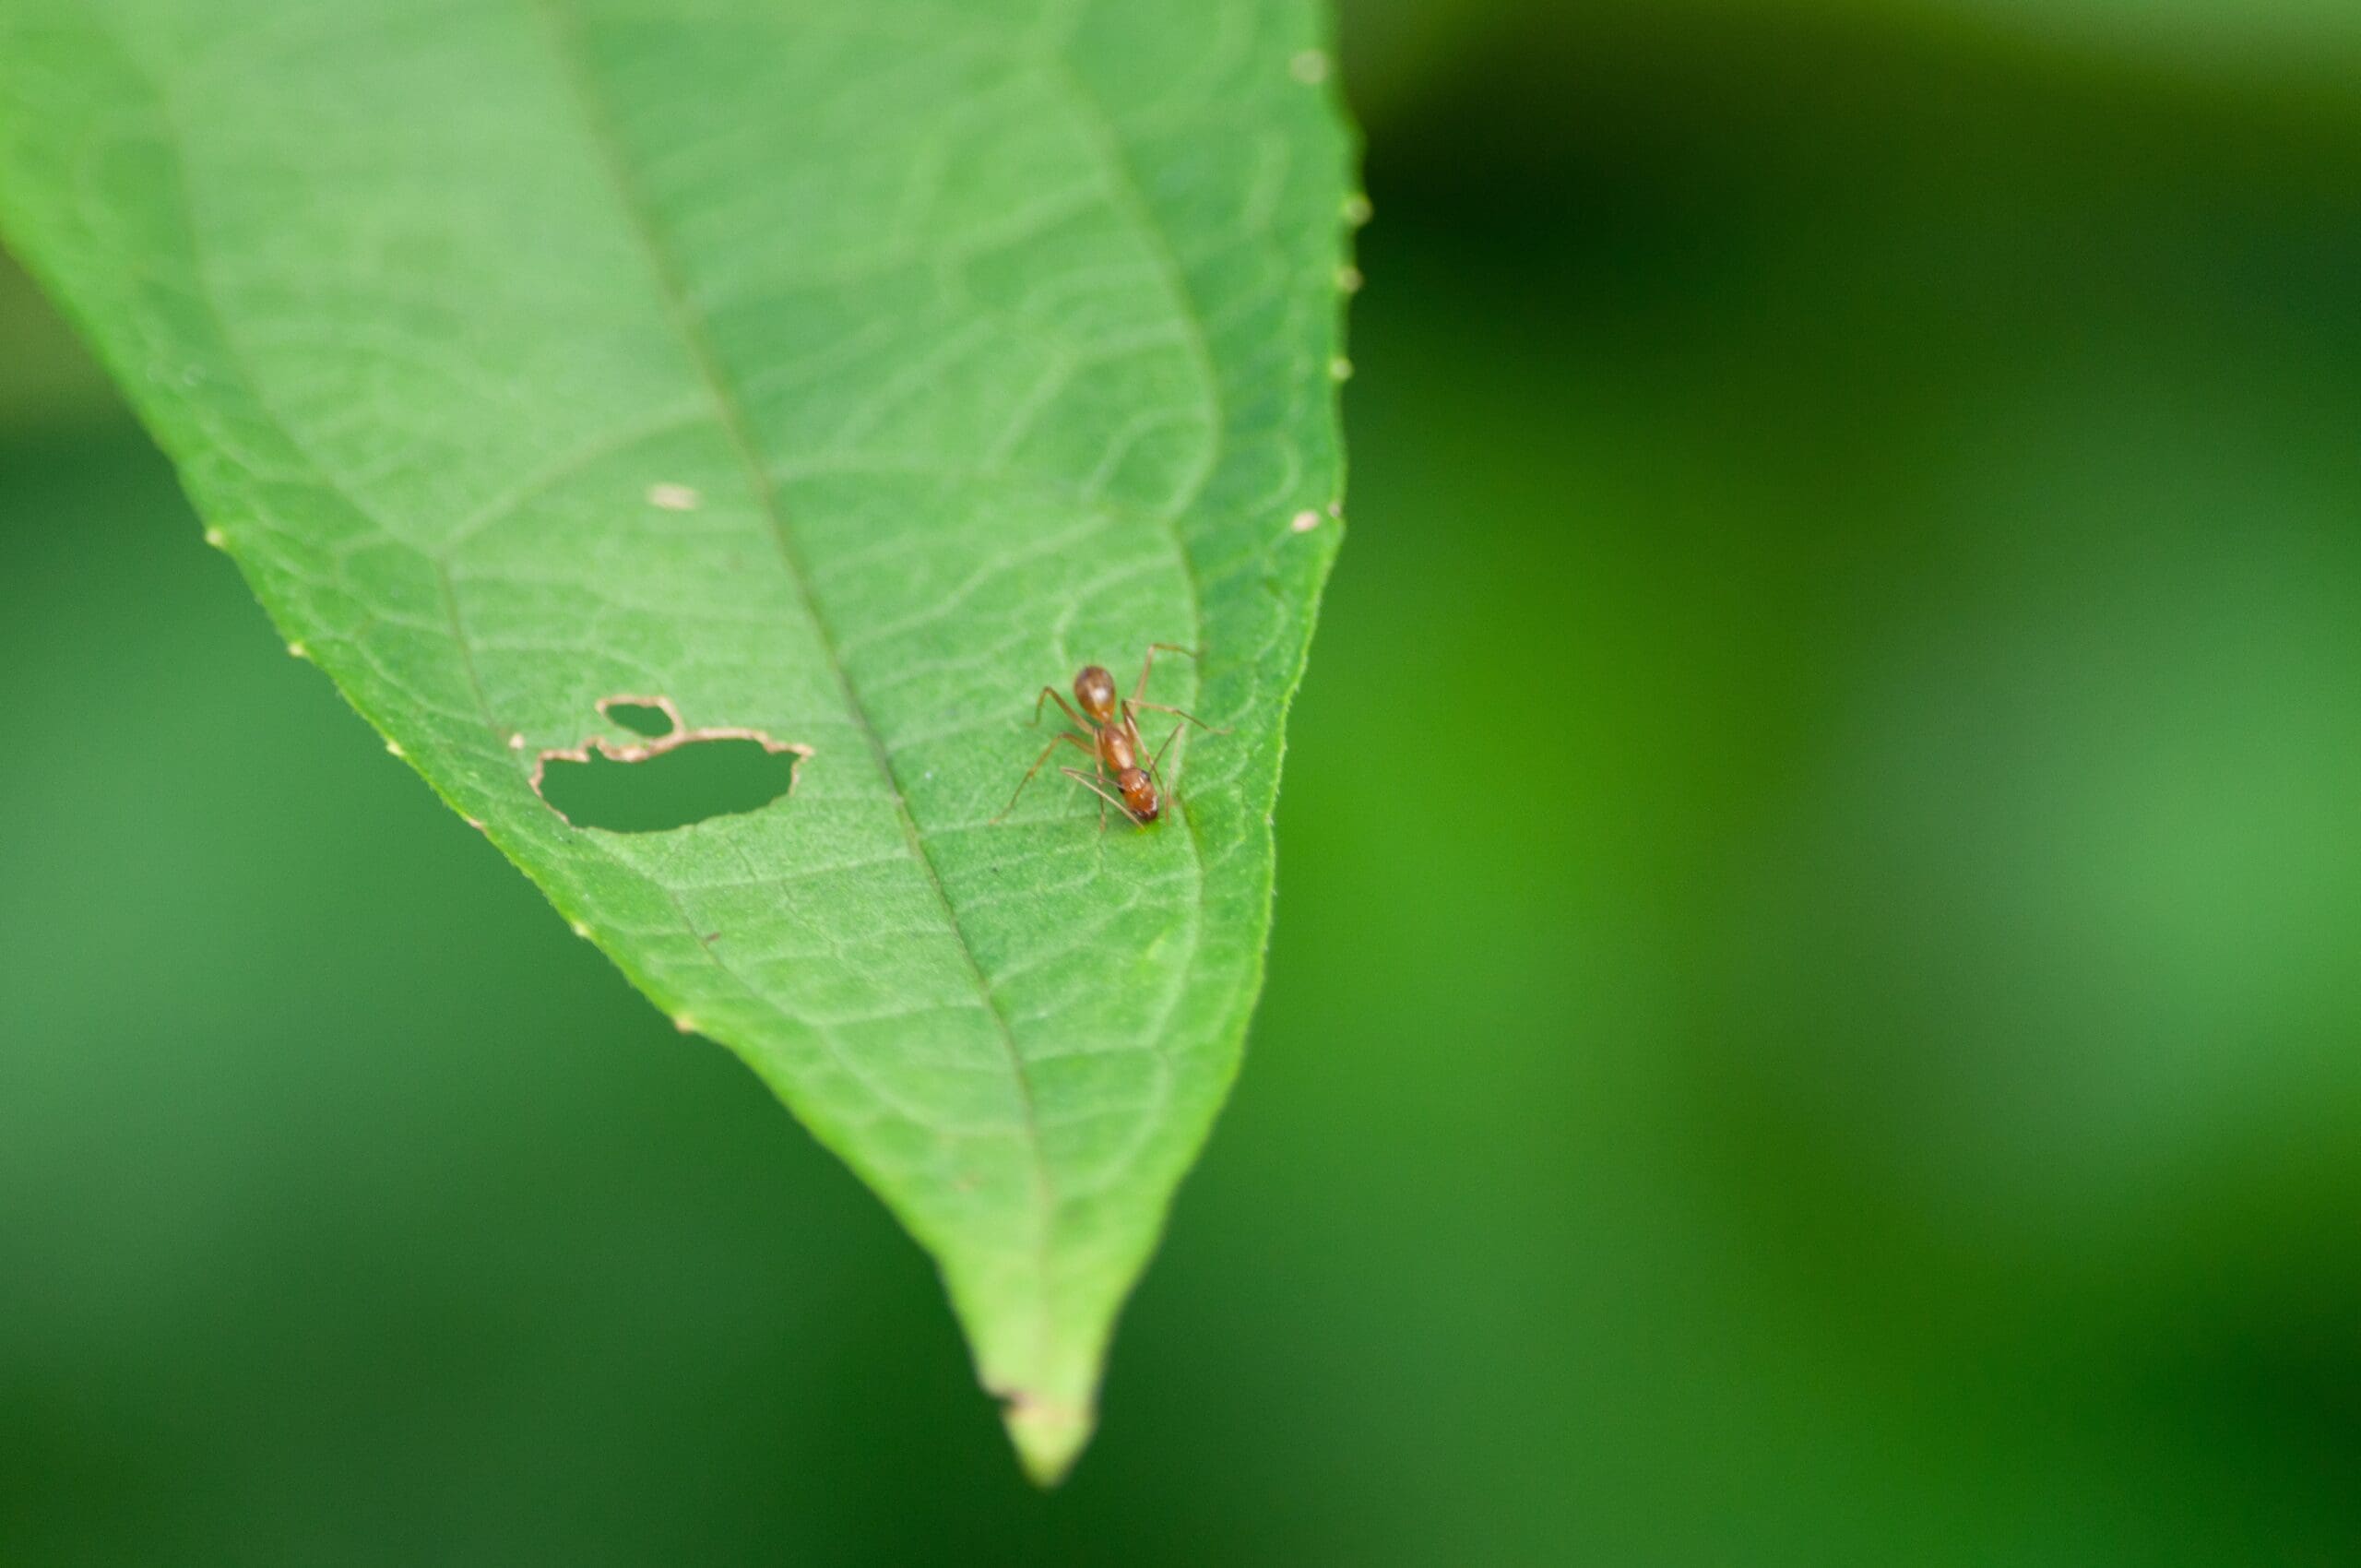 Closeup shot of an insect on a green leaf damaging it